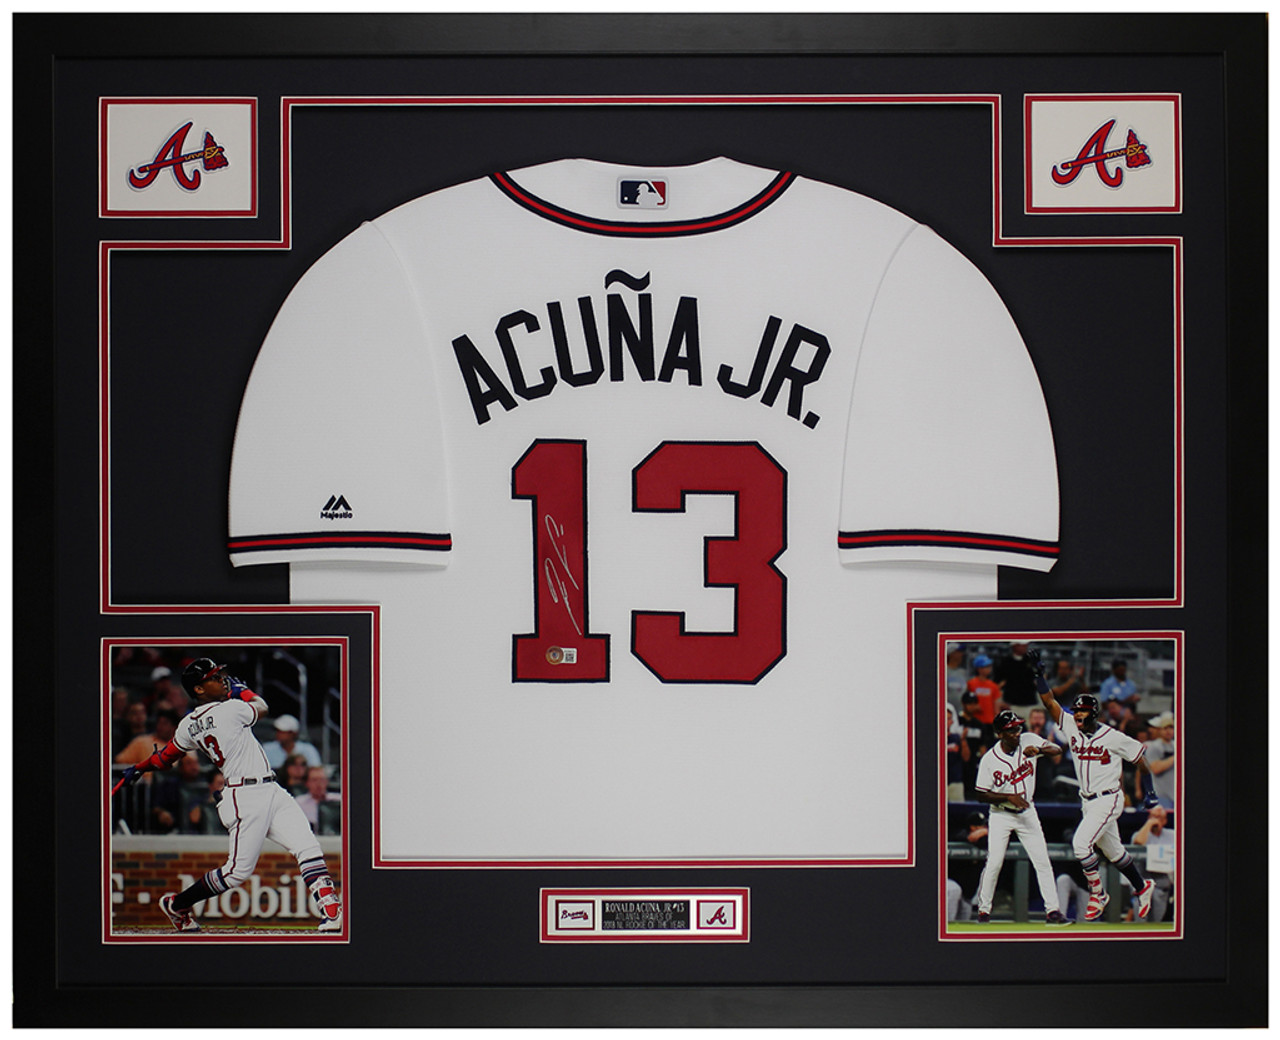 Hank Aaron Autographed and Framed Atlanta Braves Jersey